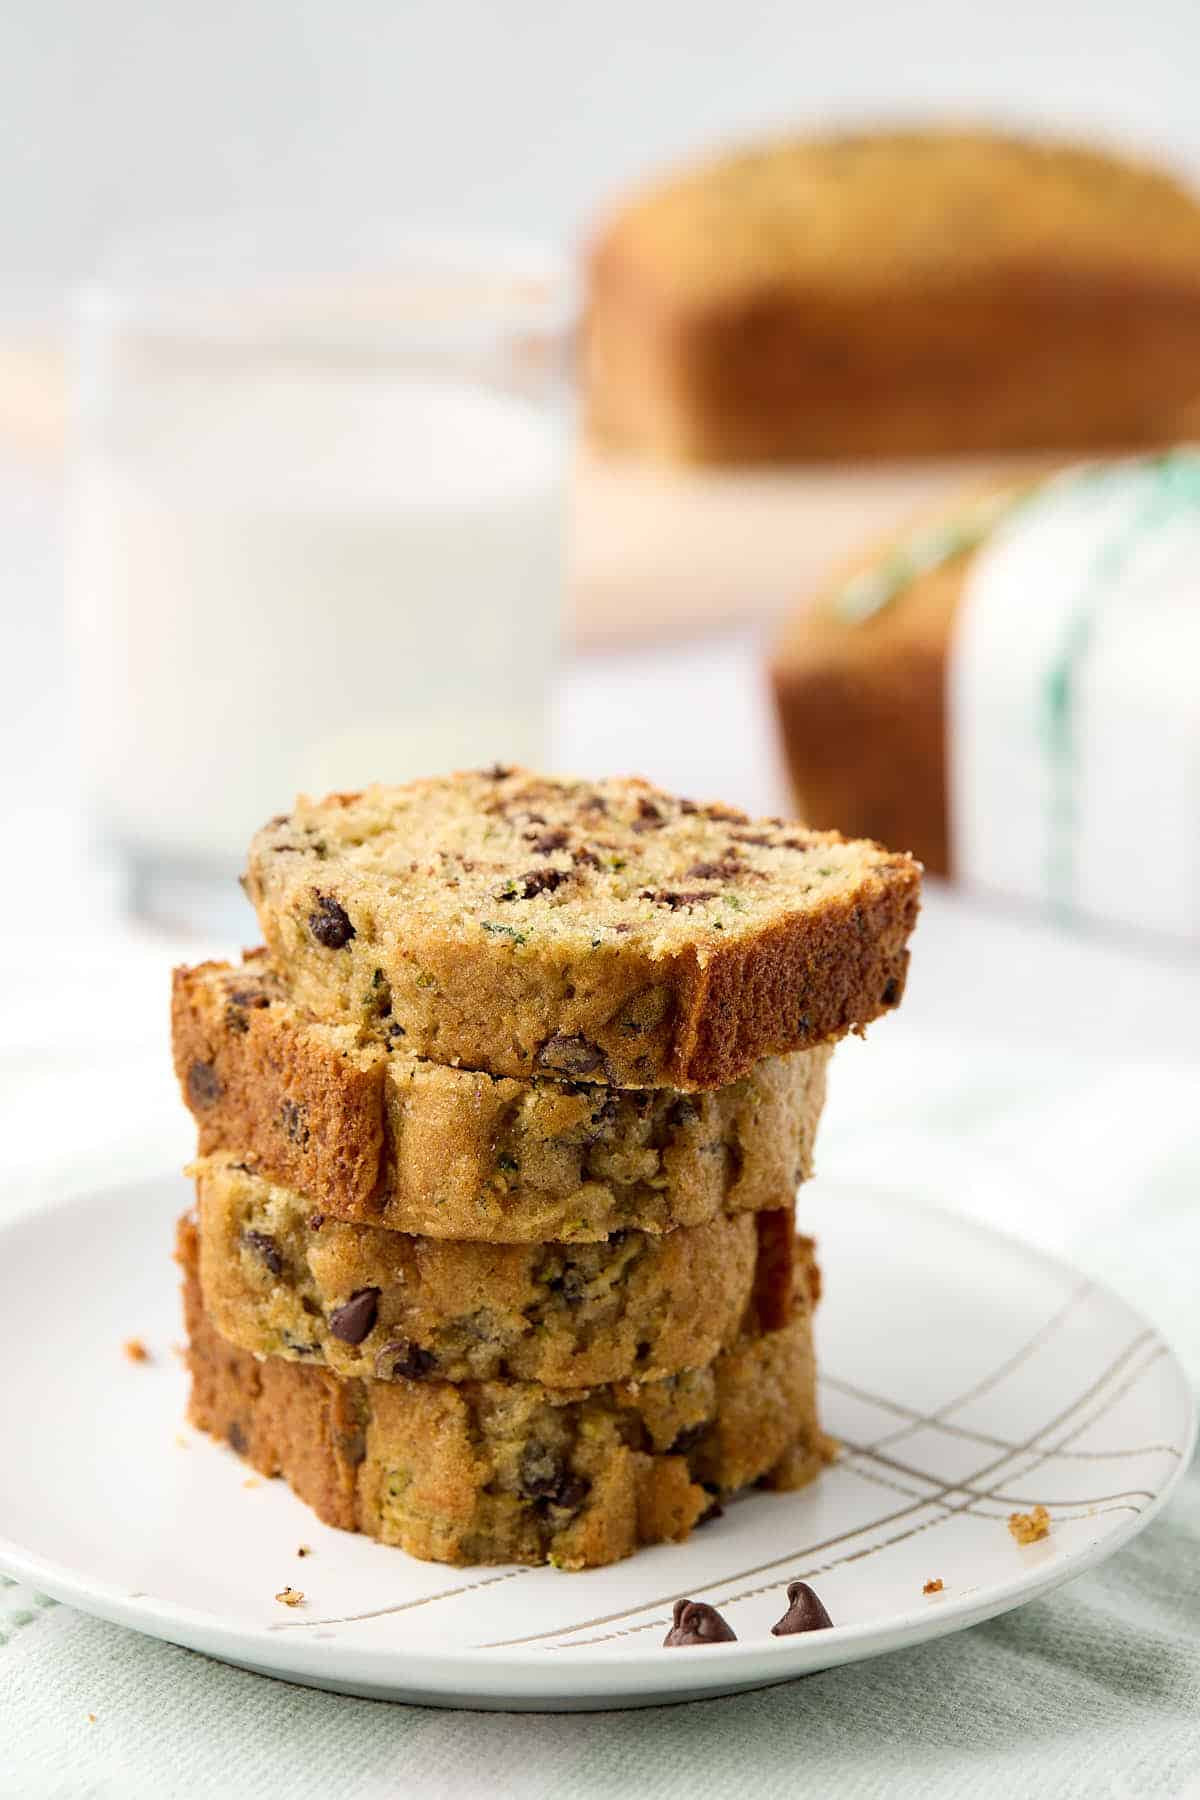 Stack of 4 slices of chocolate chip zucchini bread on a plate.